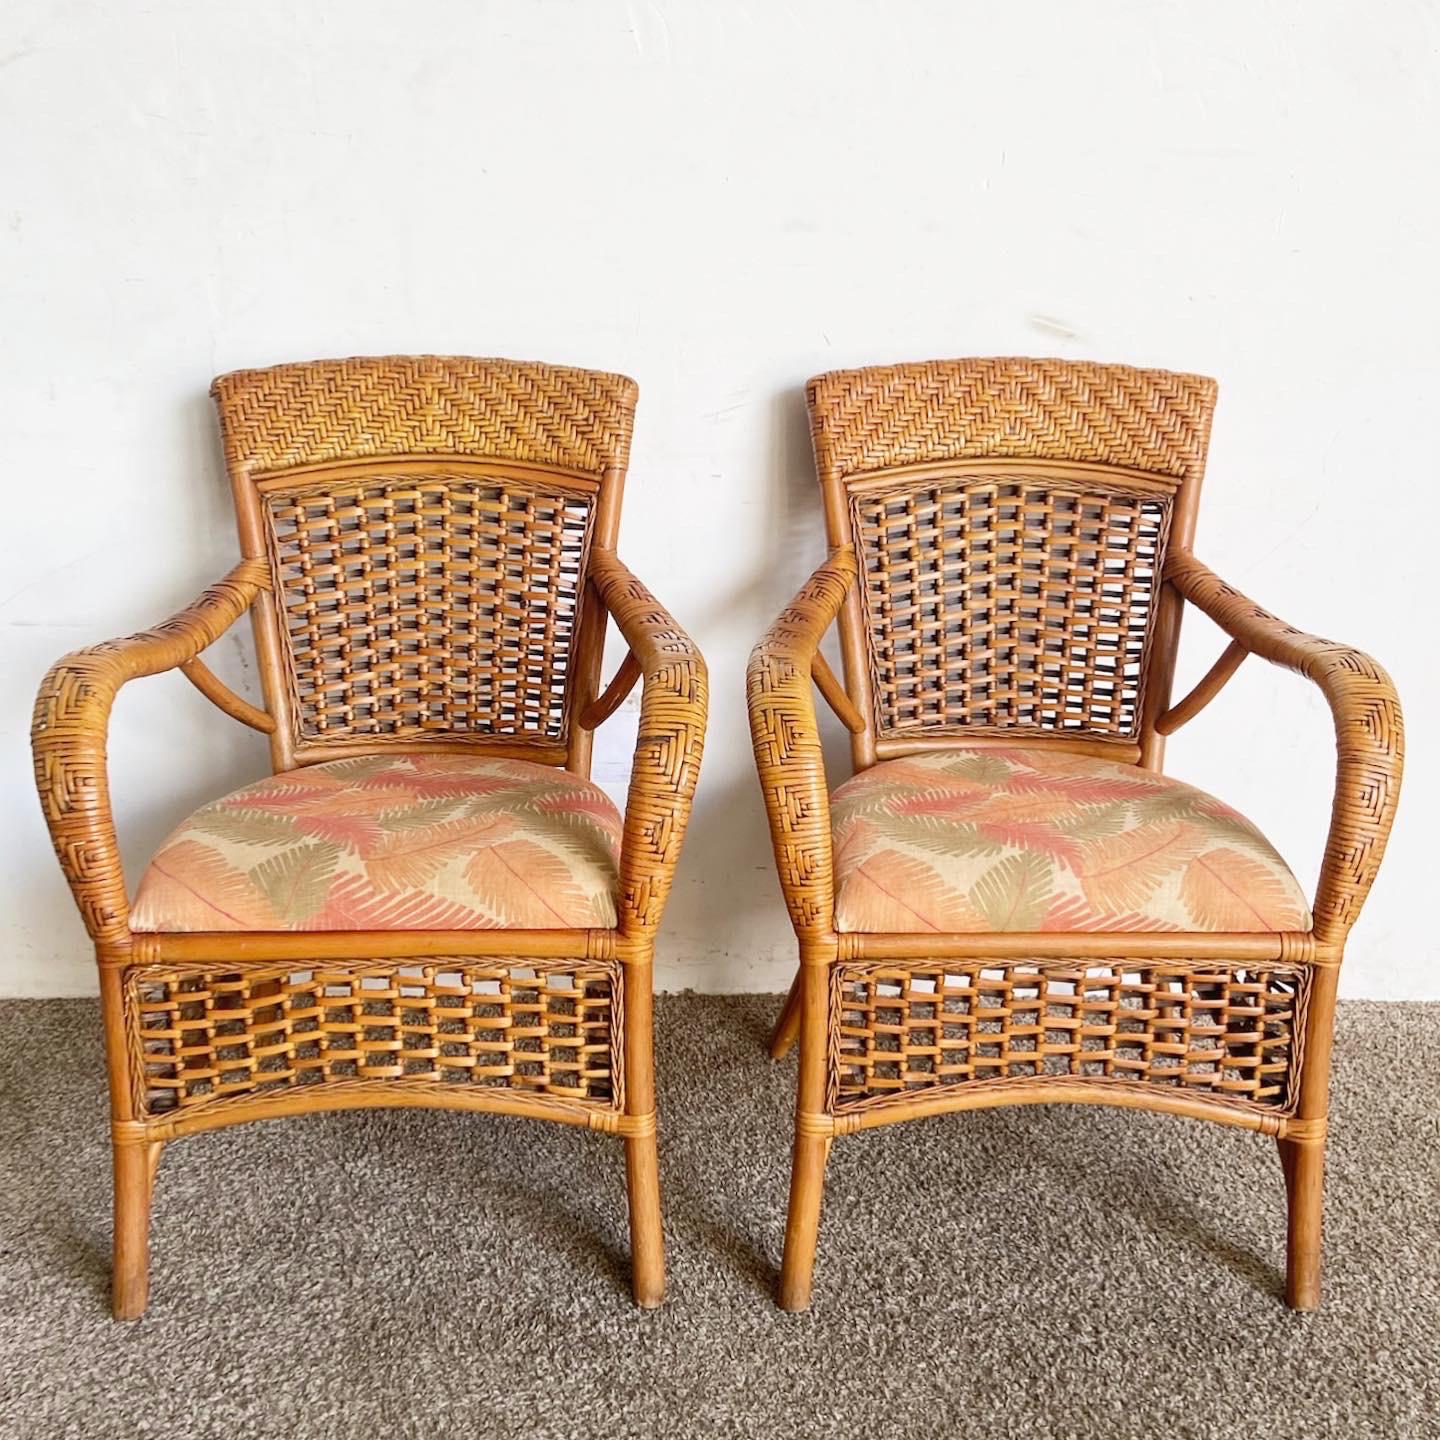 Introduce relaxed elegance to your dining room with these Boho Chic Bamboo Rattan and Wicker Dining Arm Chairs. With bamboo and rattan frames and woven wicker seats, these chairs capture the essence of bohemian luxury.
Minor wear around the edges as